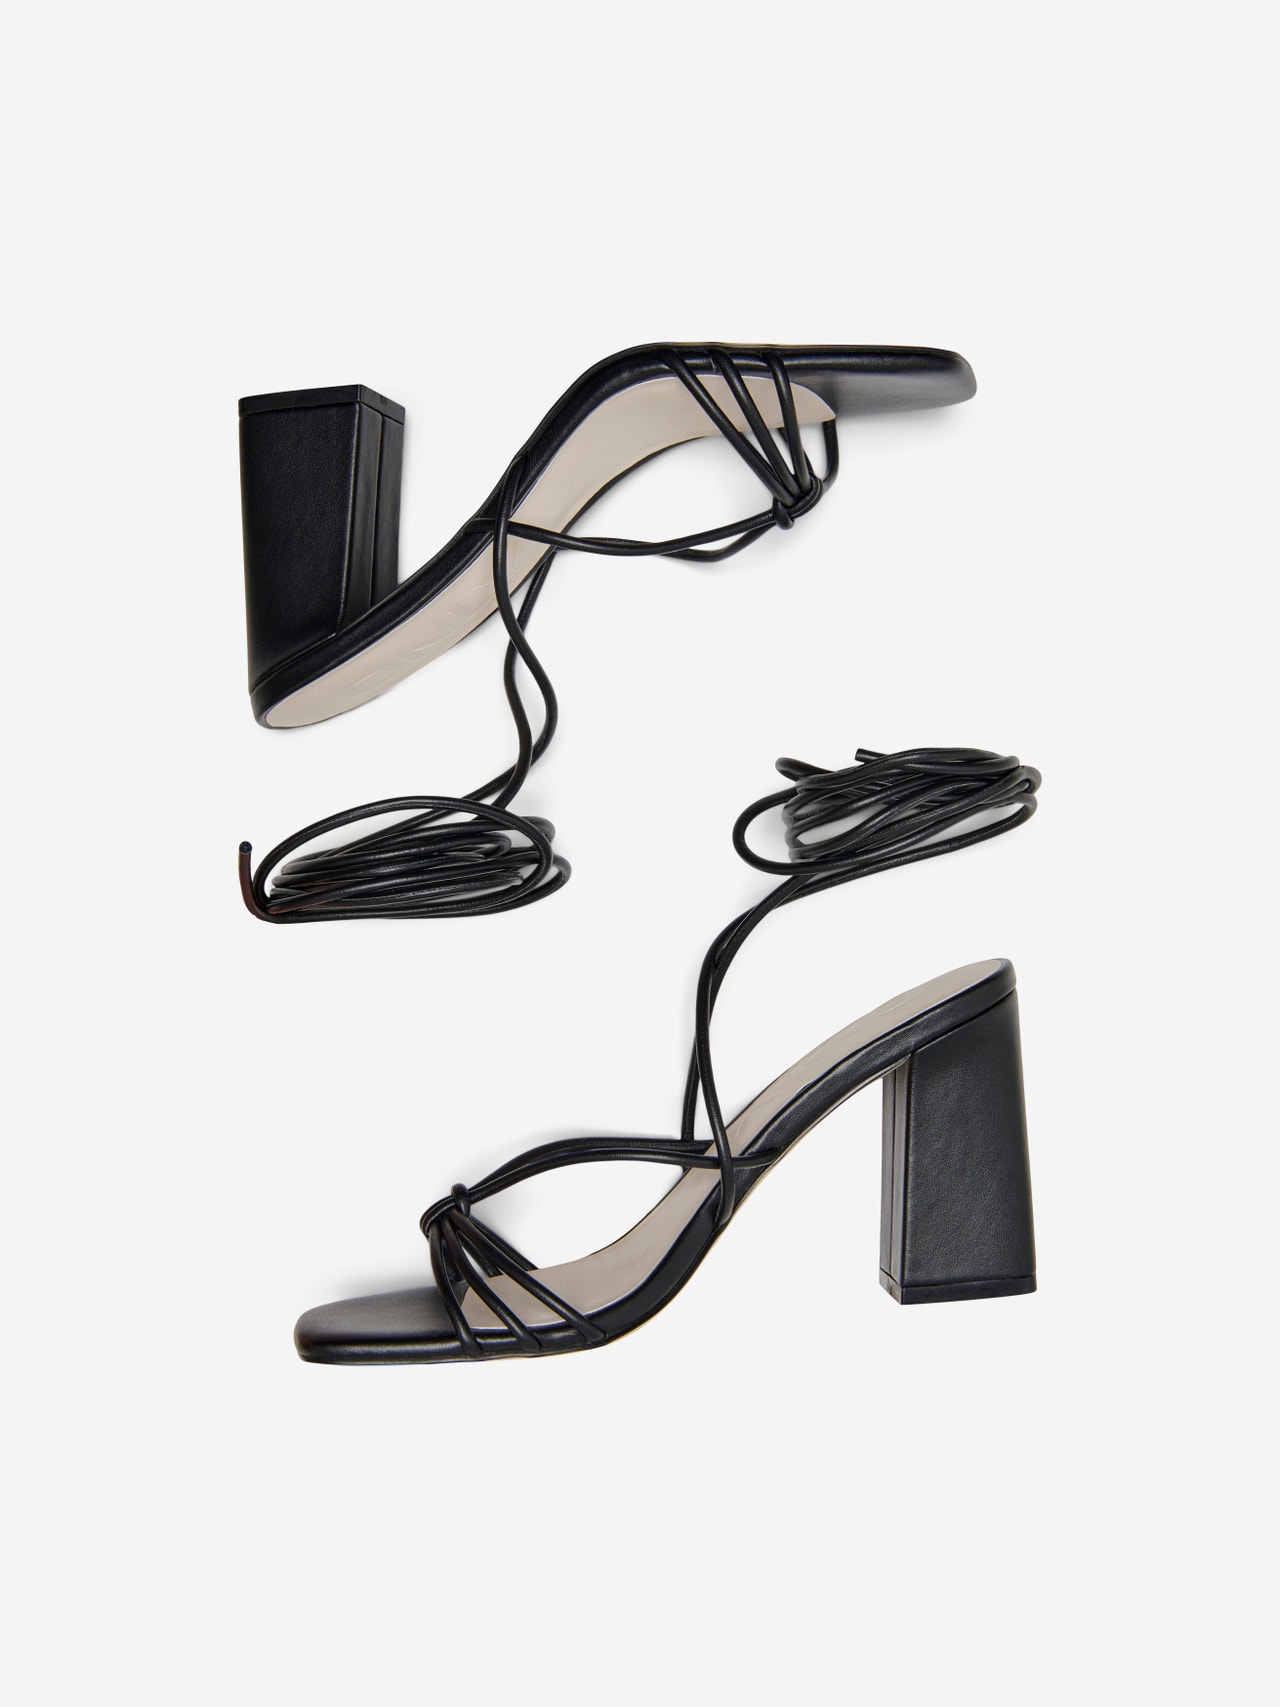 ONLY Heeled sandal with ankle string -Black - 15288460